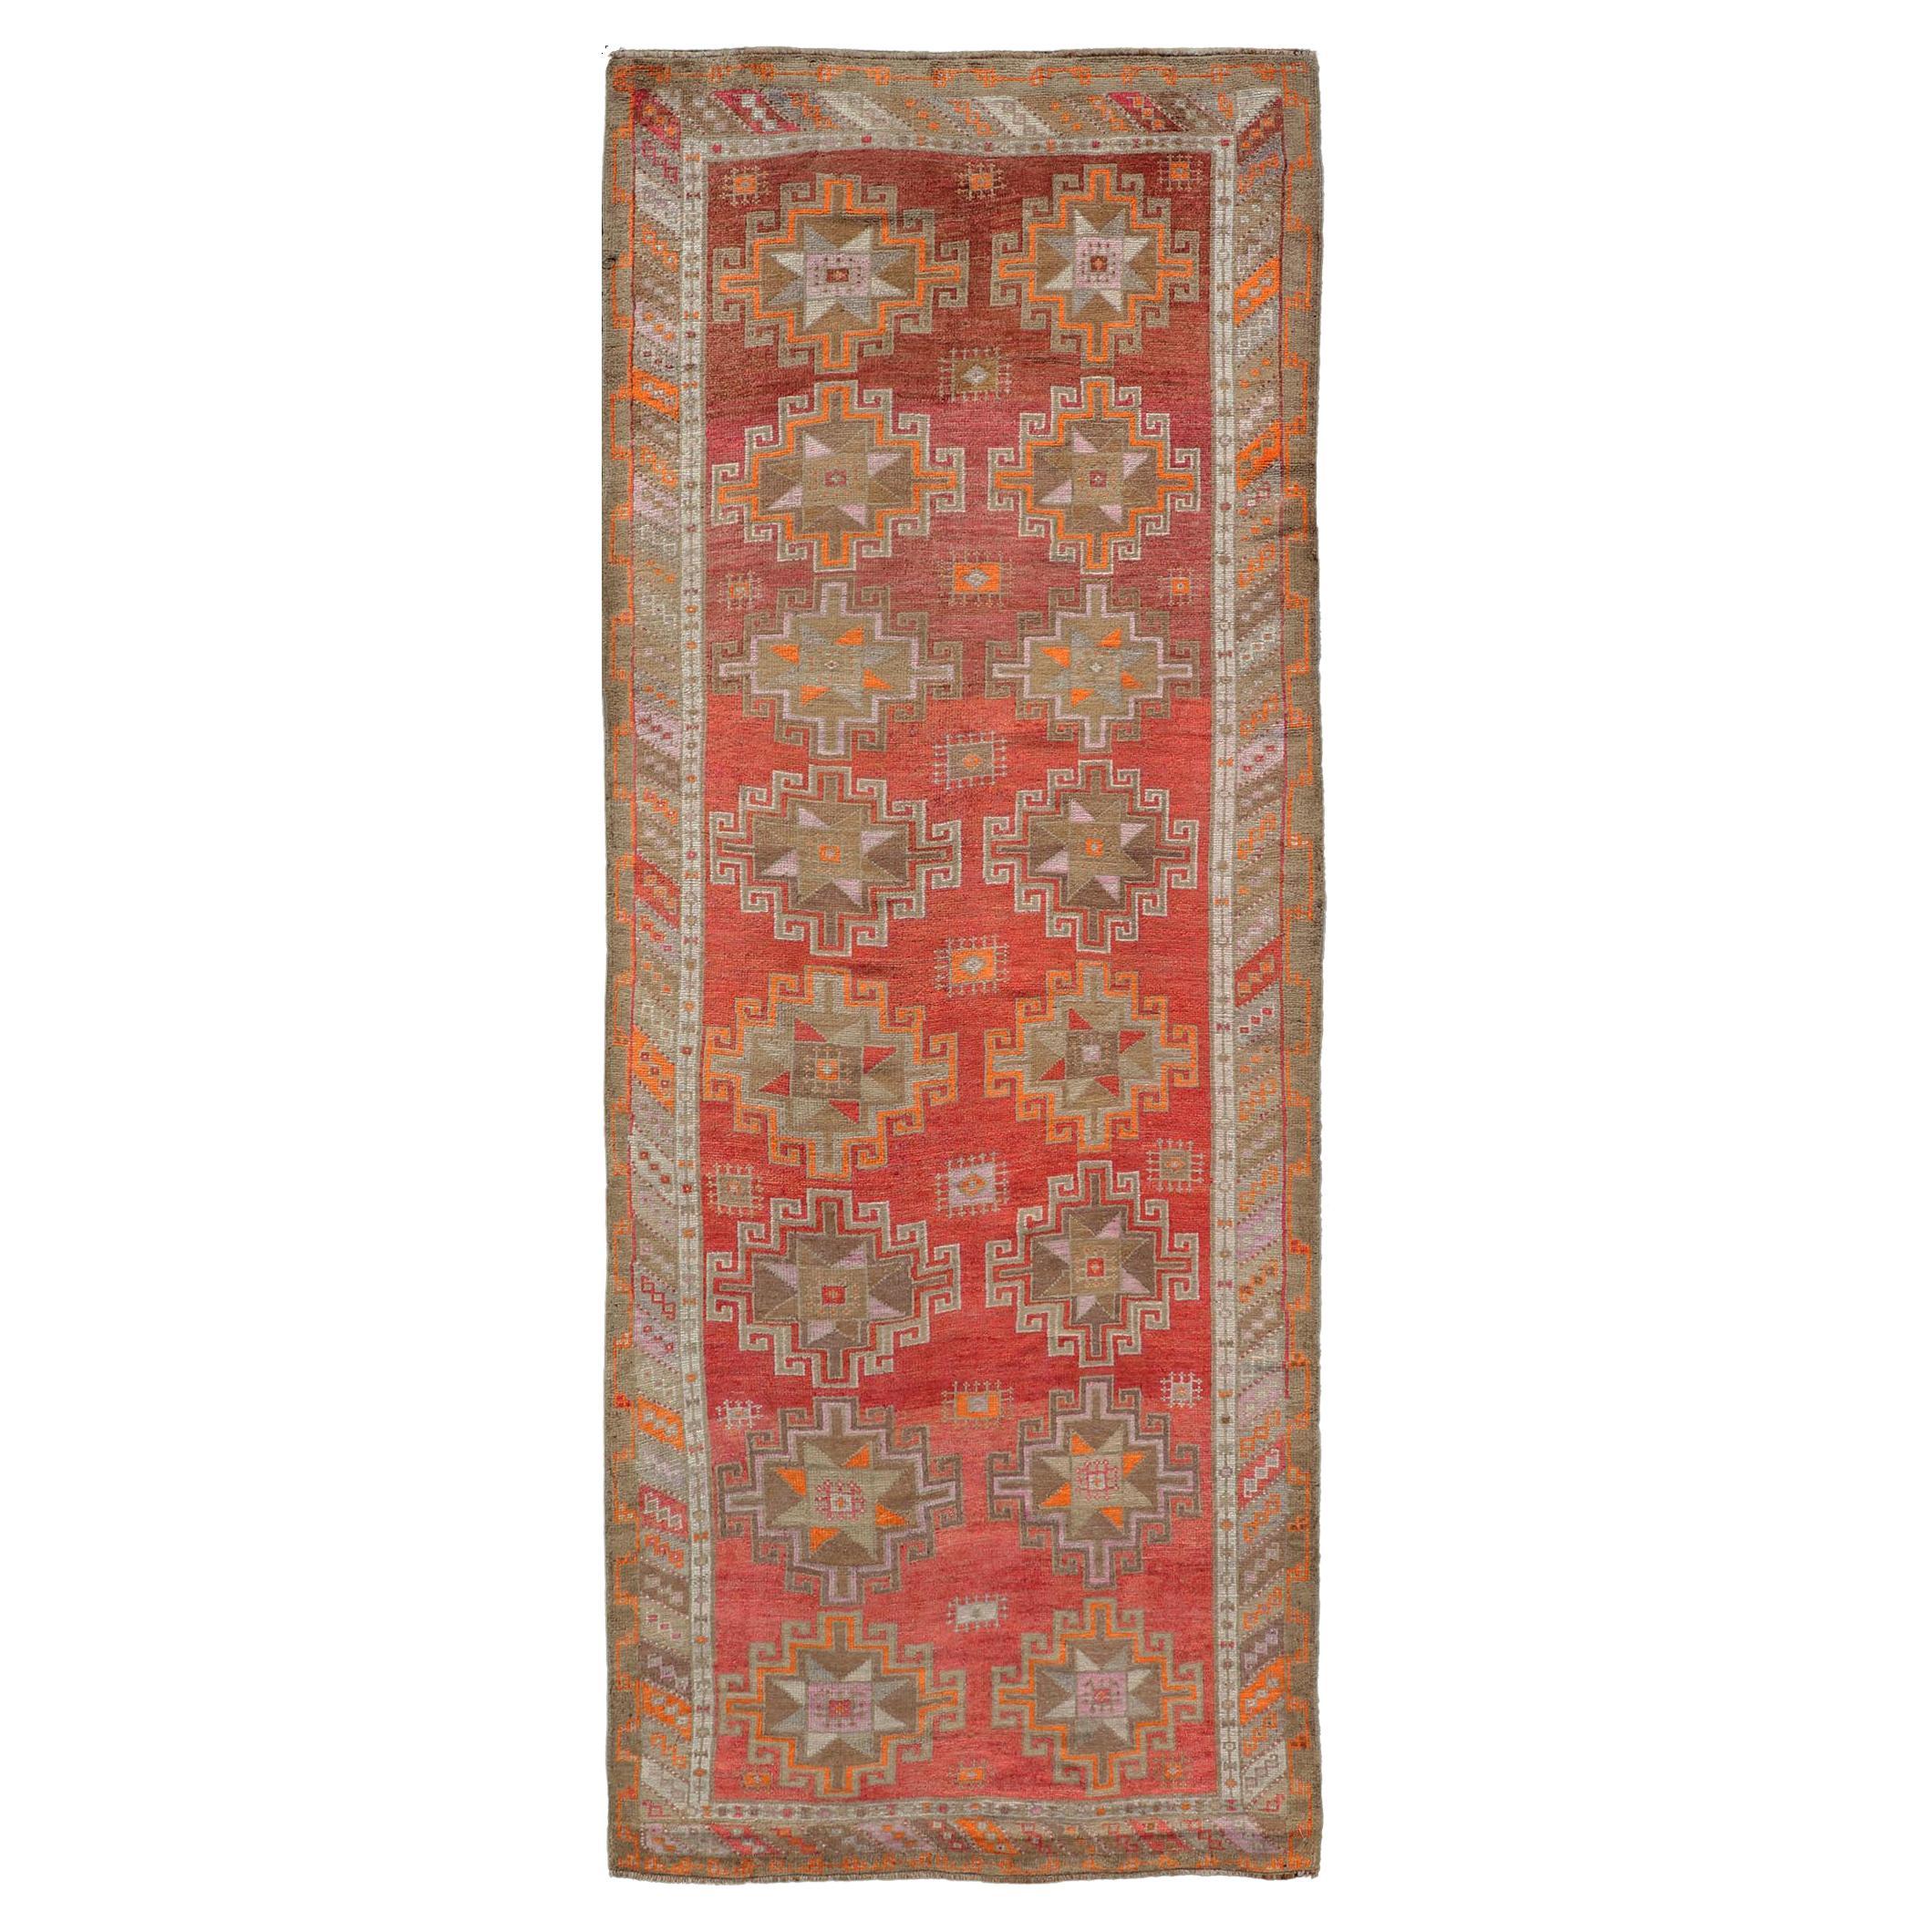 Hand Knotted Colorful Turkish Kars Gallery with Tribal Designs Geometric Motifs